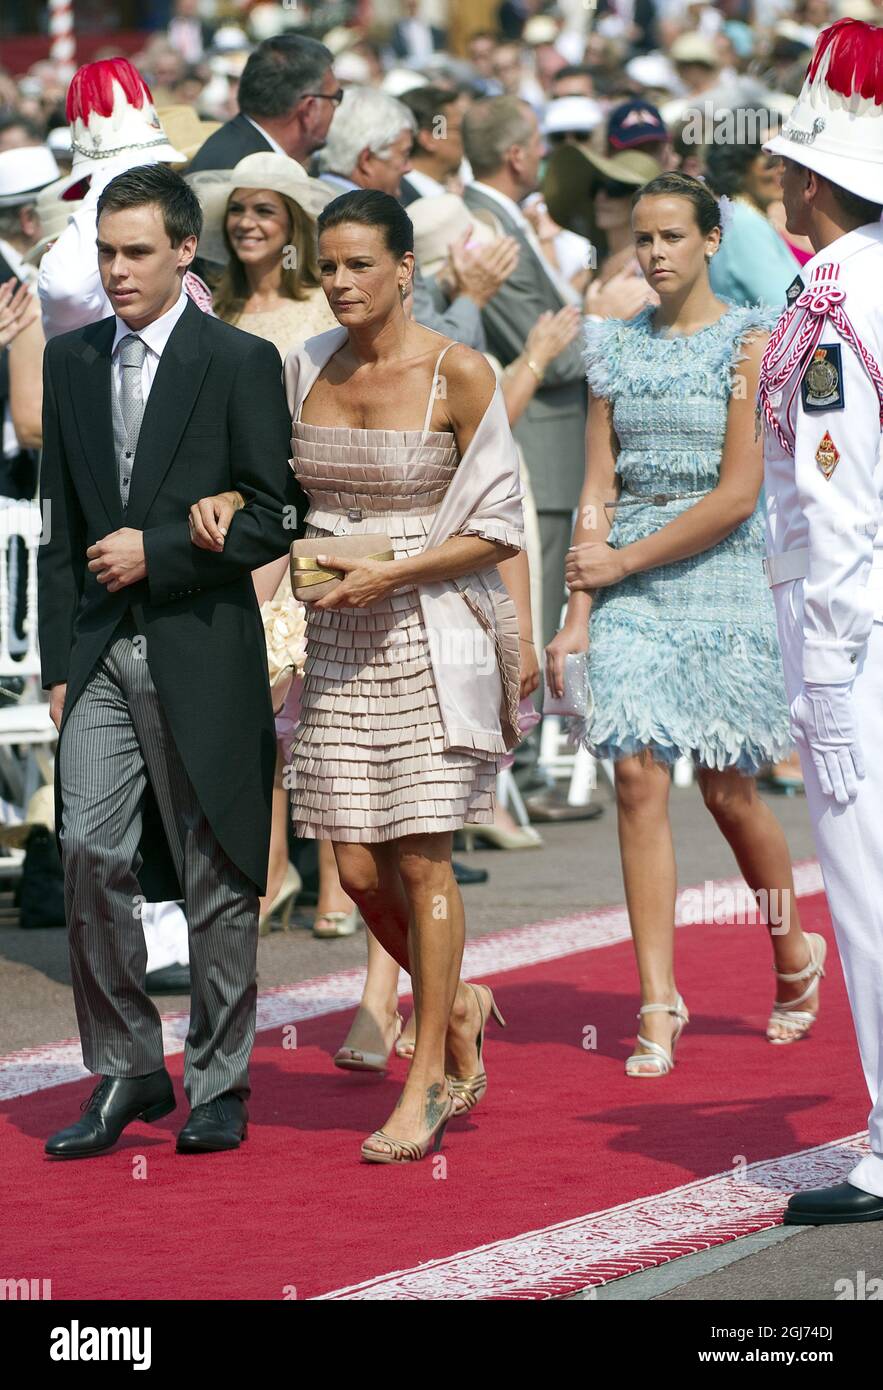 MONTE CARLO 20110702 Princess Stephanie of Monaco and her children Louis, Camille and Pauline arrive for the religious wedding of Prince Albert II with Charlene Wittstock in the Prince's Palace in Monaco, 02 July 2011. Some 3500 guests are expected to follow the ceremony in the Main Courtyard of the Palace. Foto: Maja Suslin / SCANPIX / Kod 10300 Stock Photo